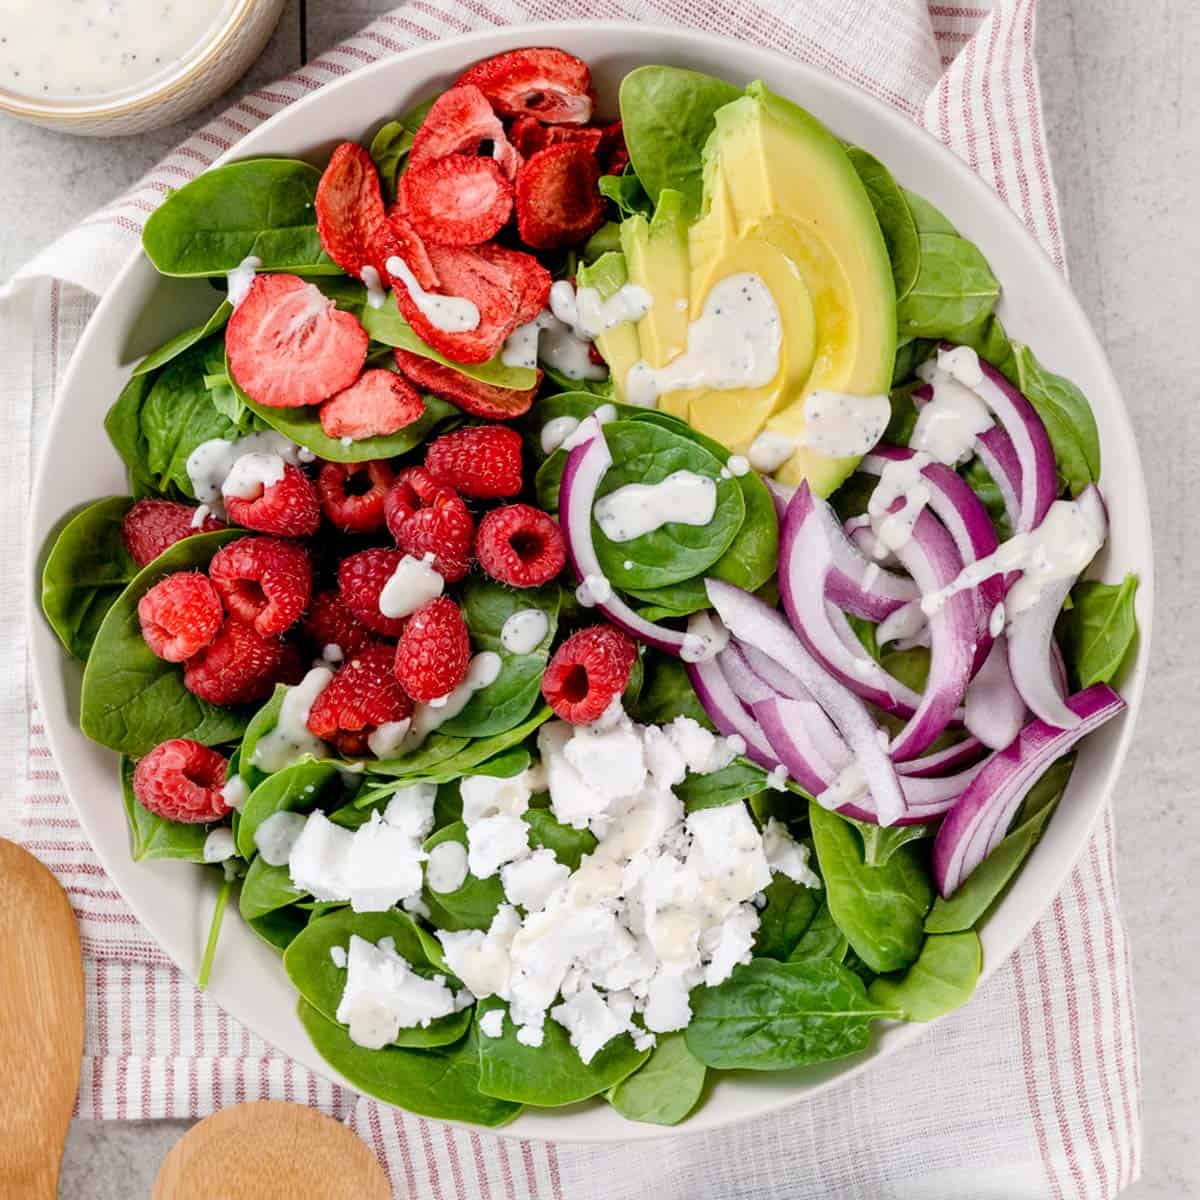 Big bowl filled with a raspberry and strawberry spinach salad with dairy free poppyseed dressing. Other ingredients like red onion and dairy free feta cheese and avocado are also on the salad.